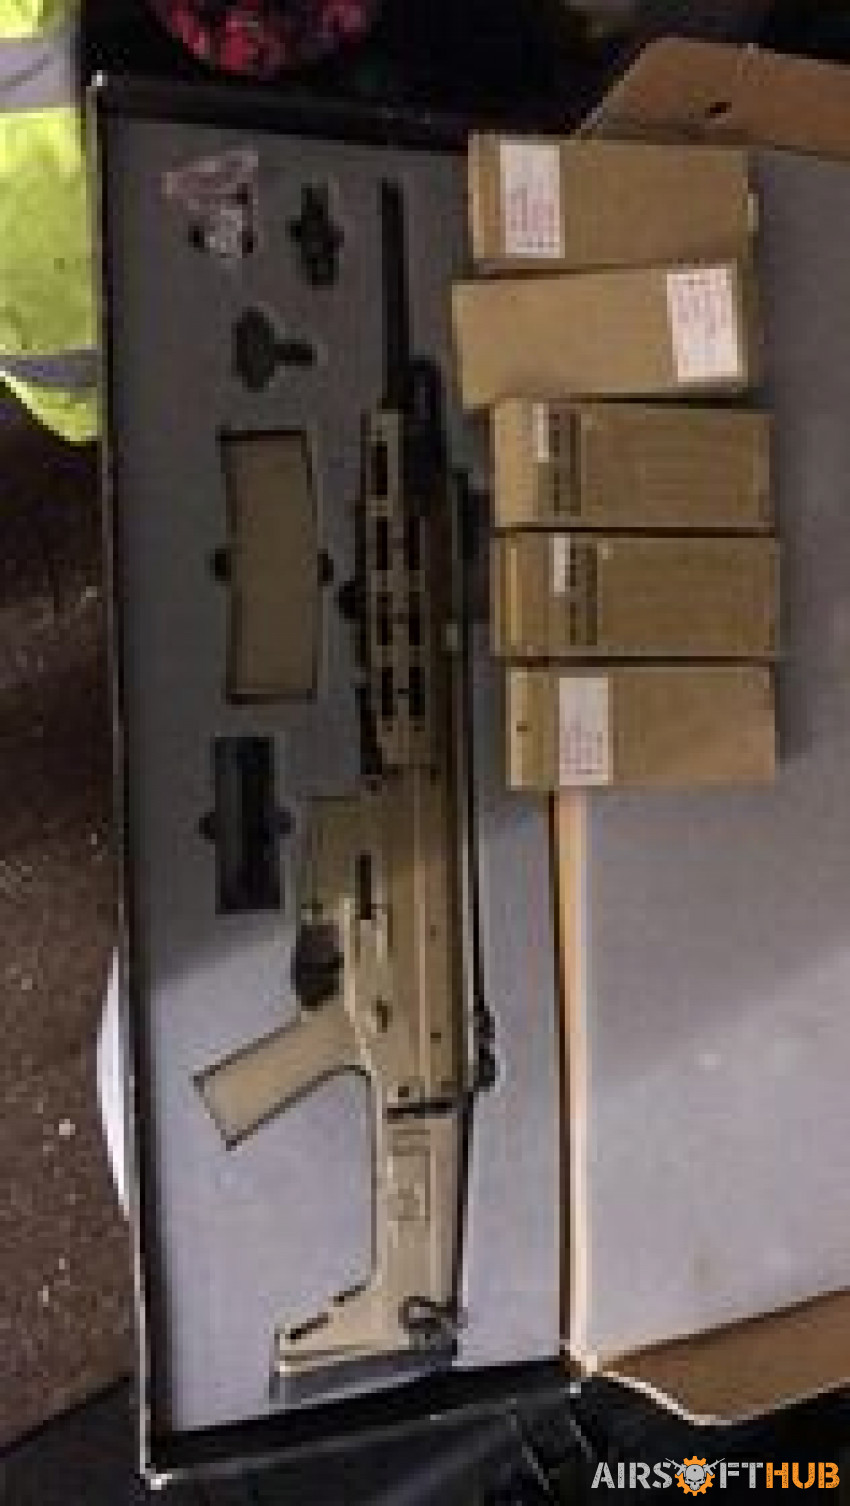 HPA M4, Scar H and WSK - Used airsoft equipment